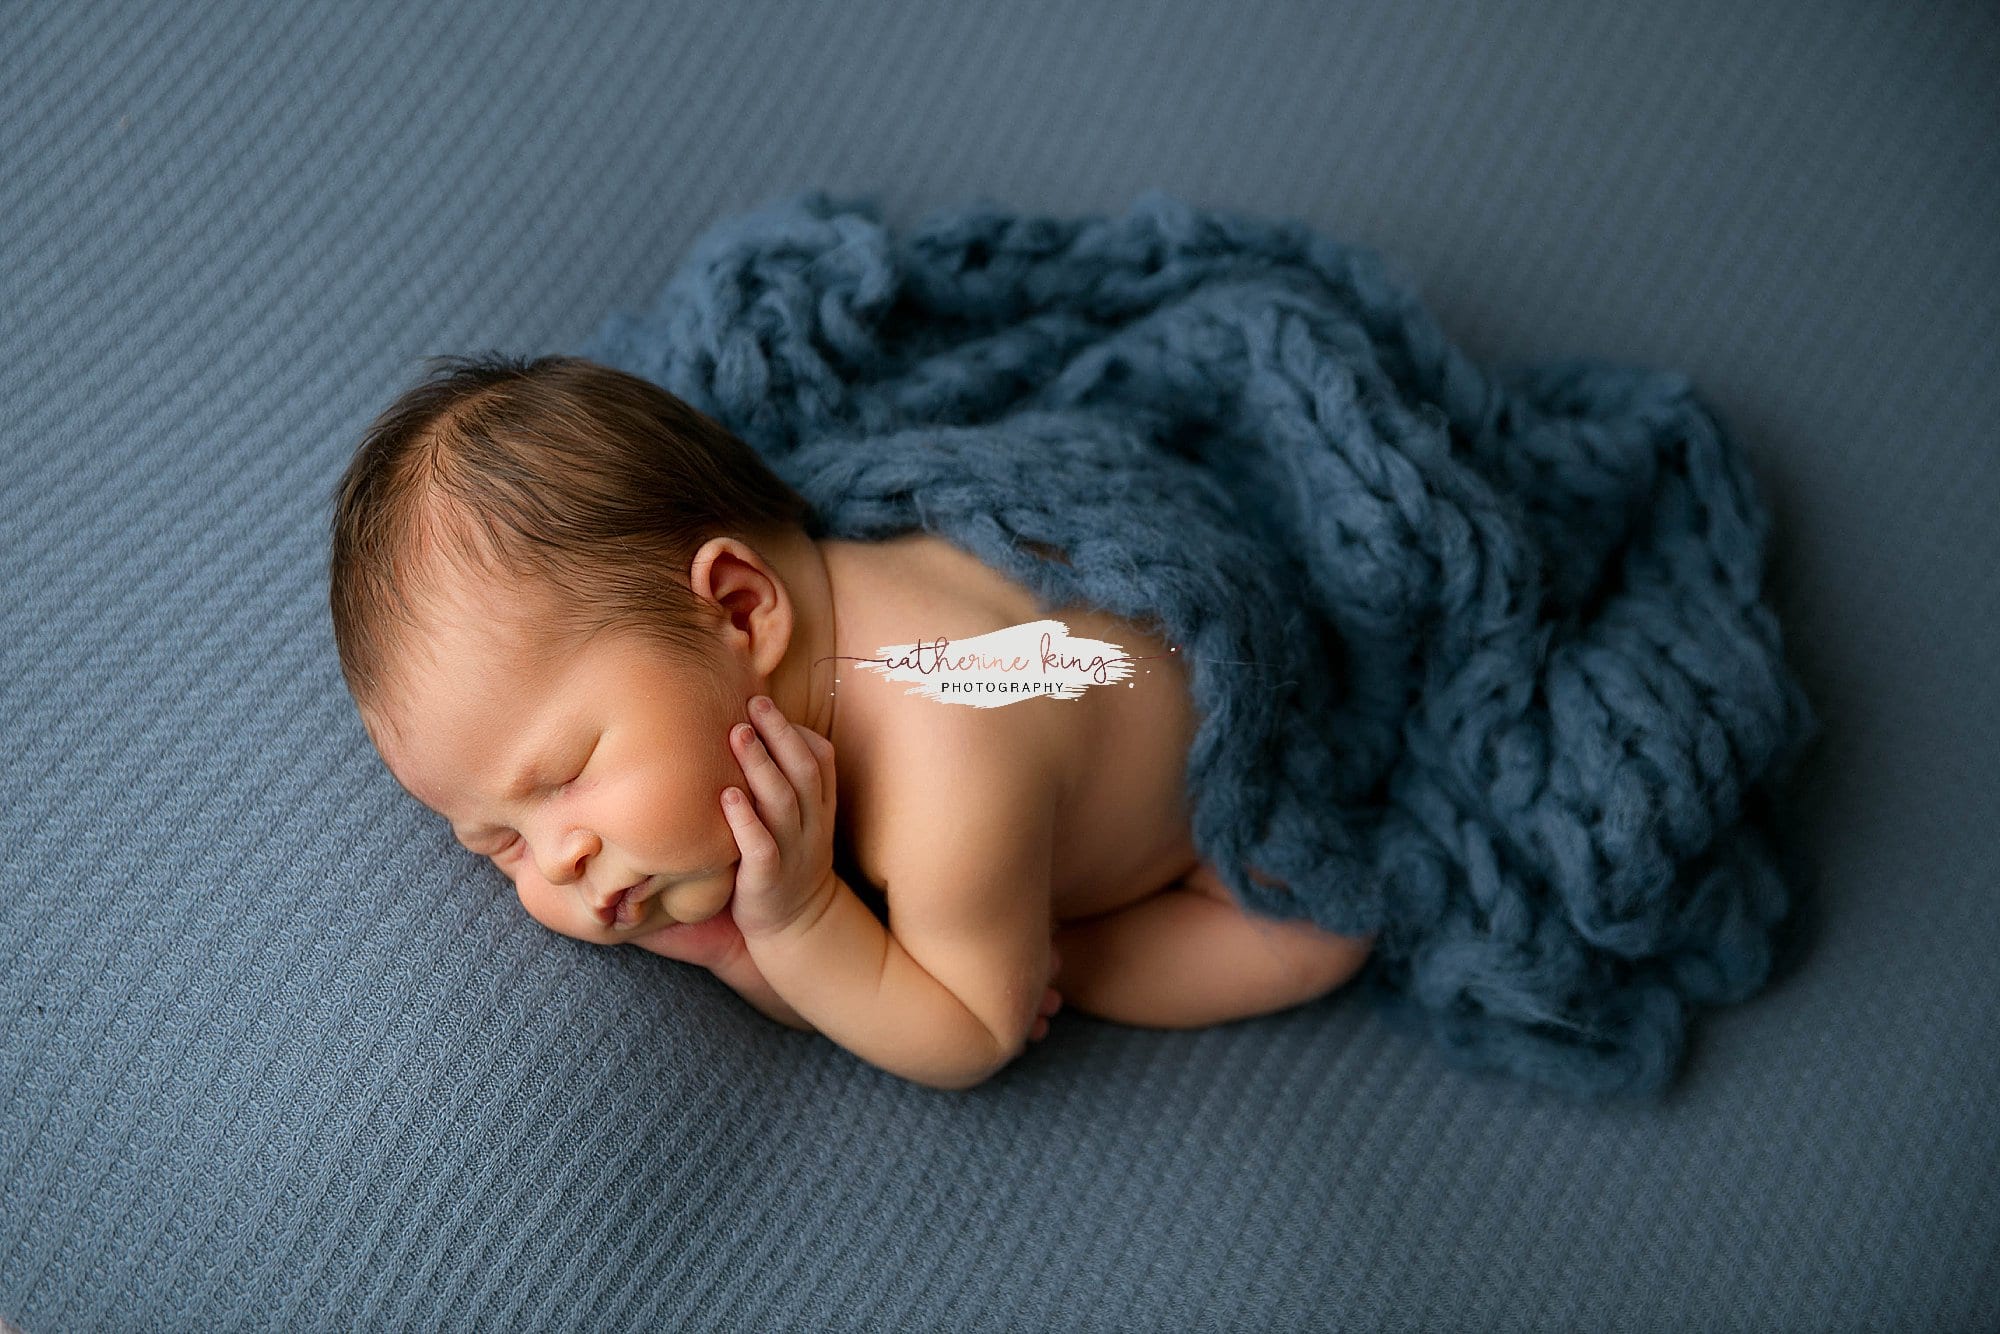 Top 5 Newborn Photography Poses on Seamless Fabric Backdrop